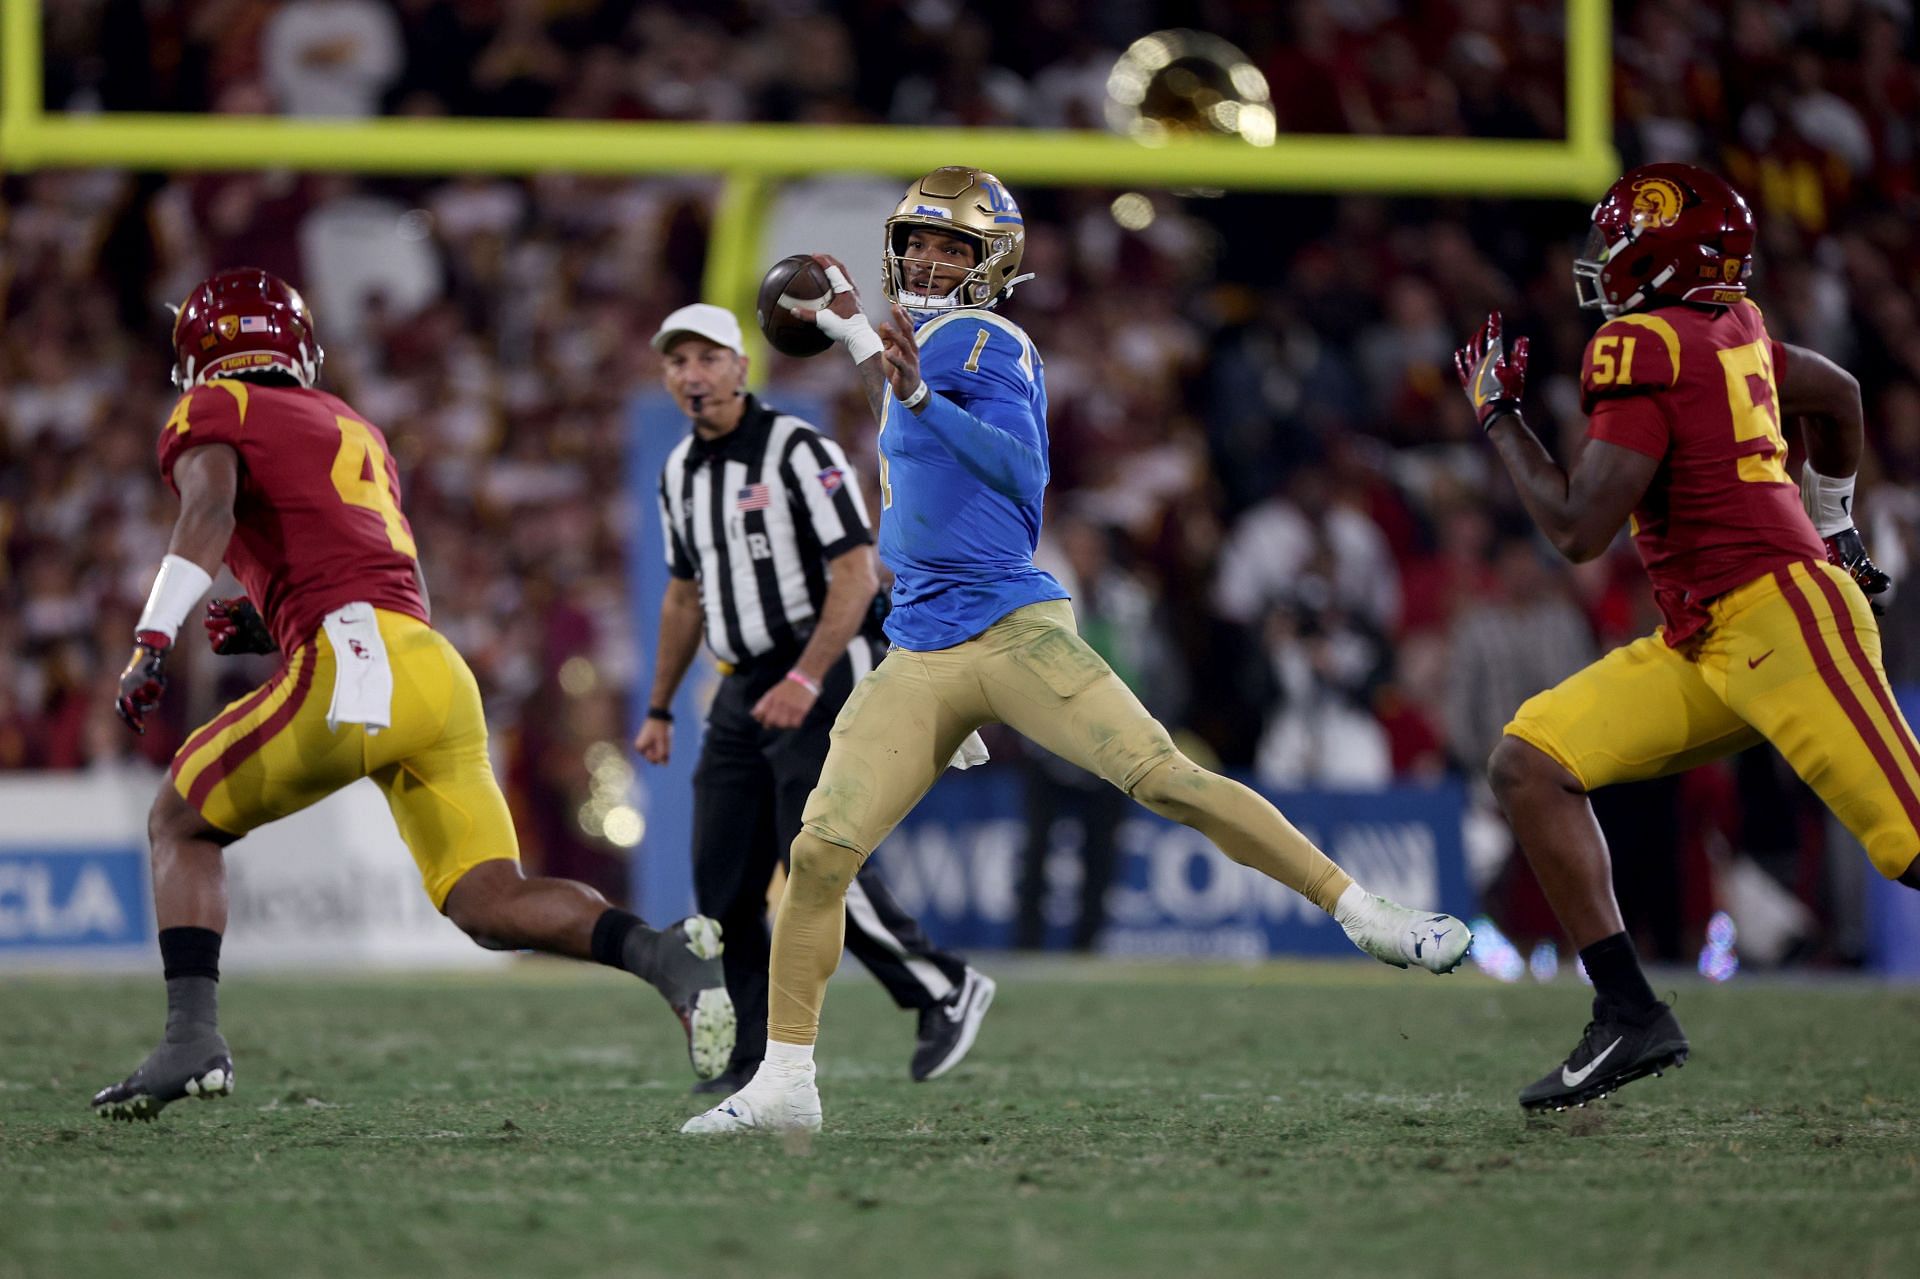 Dorian Thompson-Robinson #1 of the UCLA Bruins throws a pass against the USC Trojans 